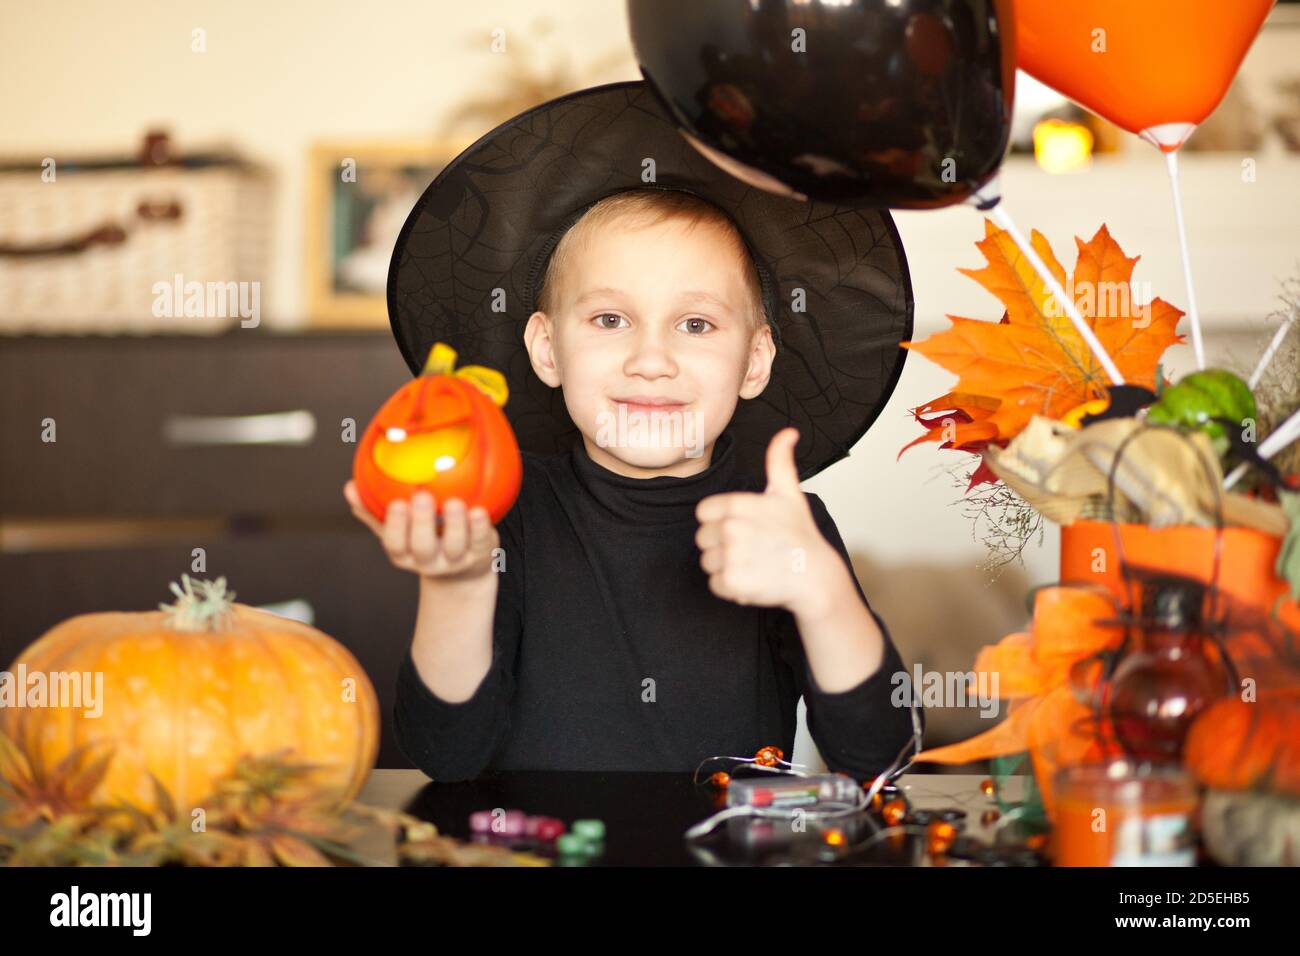 funny kid boy in witch costume for Halloween with pumpkin Jack in a hands. Stock Photo